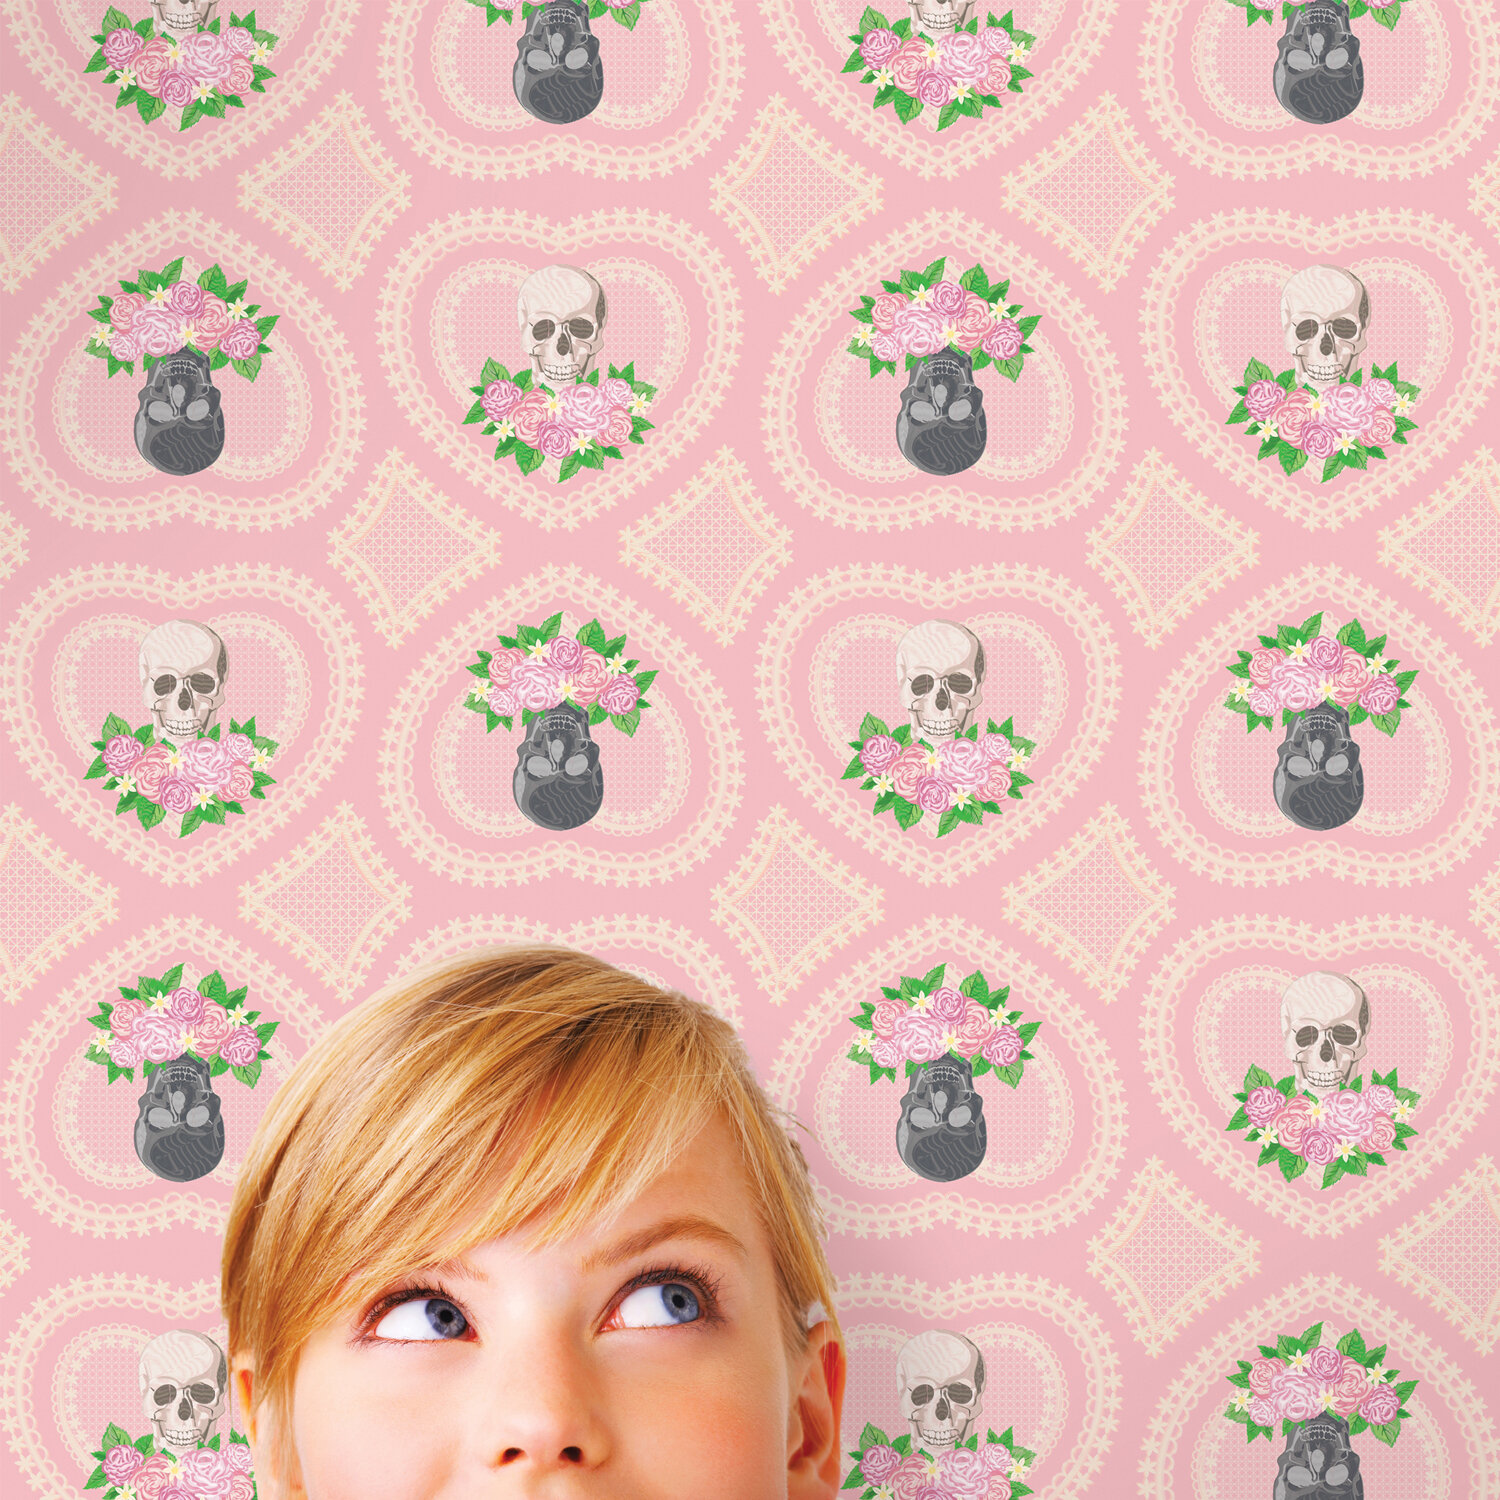  Composite image of Wallcandy Arts’ vinyl wallpaper, pattern background and stock image using Photoshop 